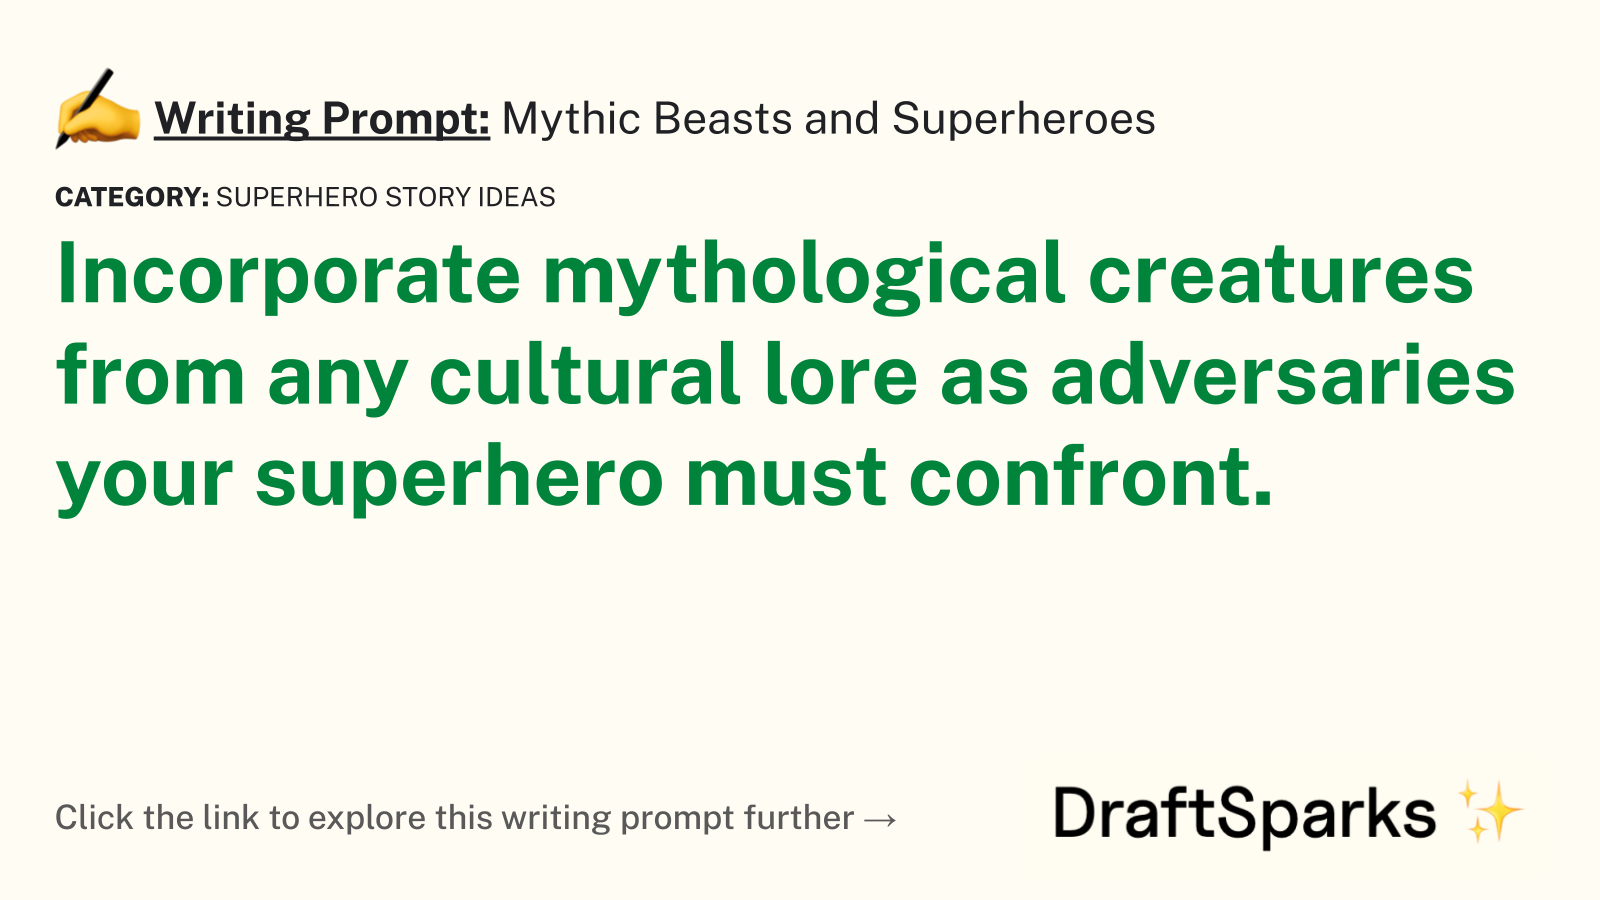 Mythic Beasts and Superheroes